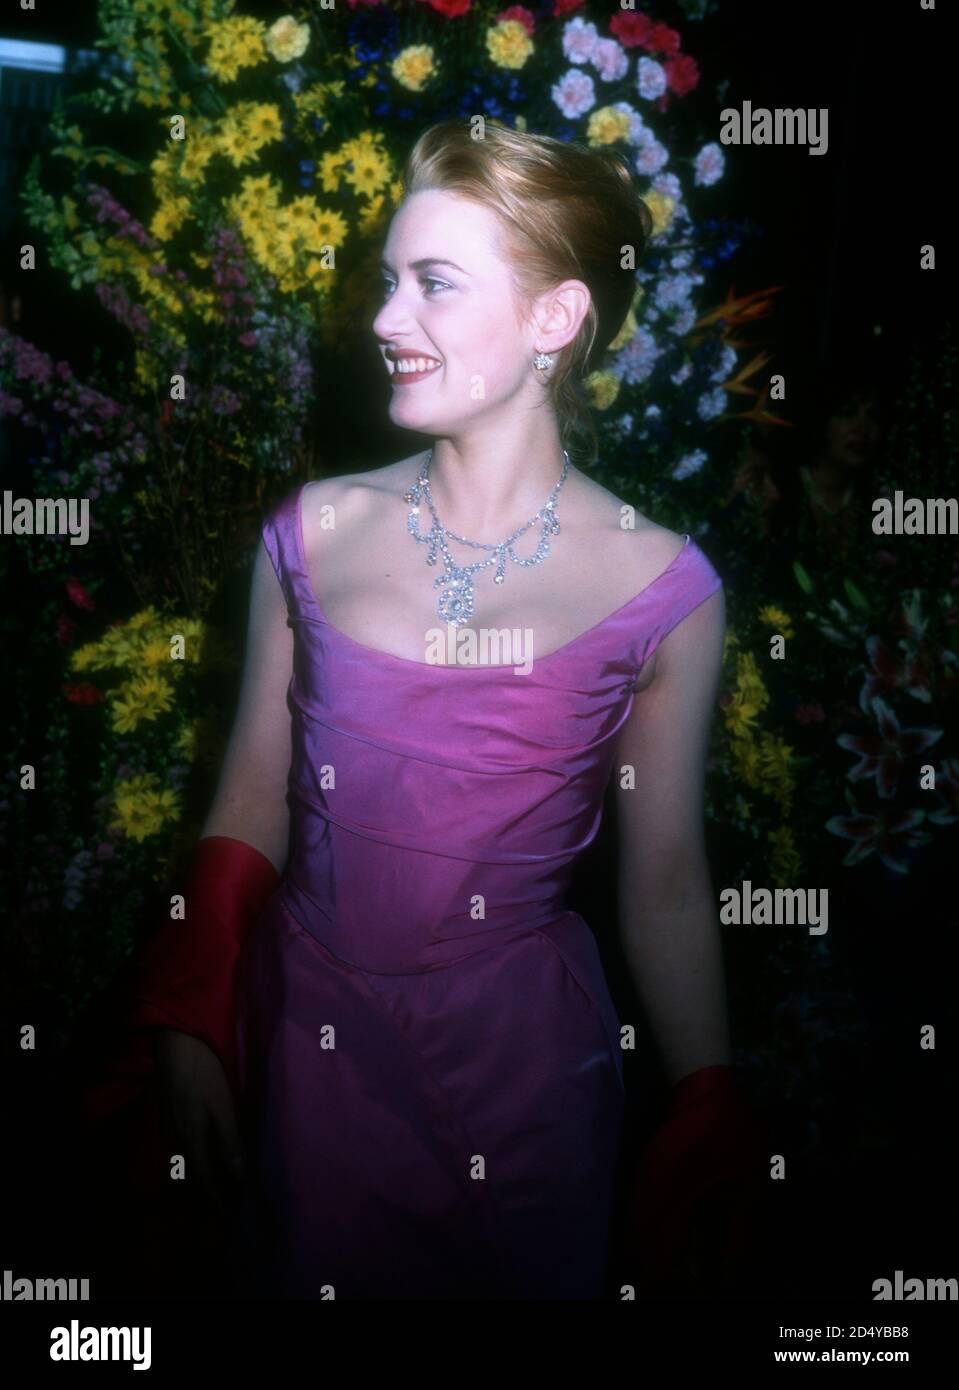 Los Angeles, California, USA 25th March 1996 Actress Kate Winslet attends the 68th Annual Academy Awards at Dorothy Chandler Pavilioin on March 25, 1996 in Los Angeles, California, USA. Photo by Barry King/Alamy Stock Photo Stock Photo